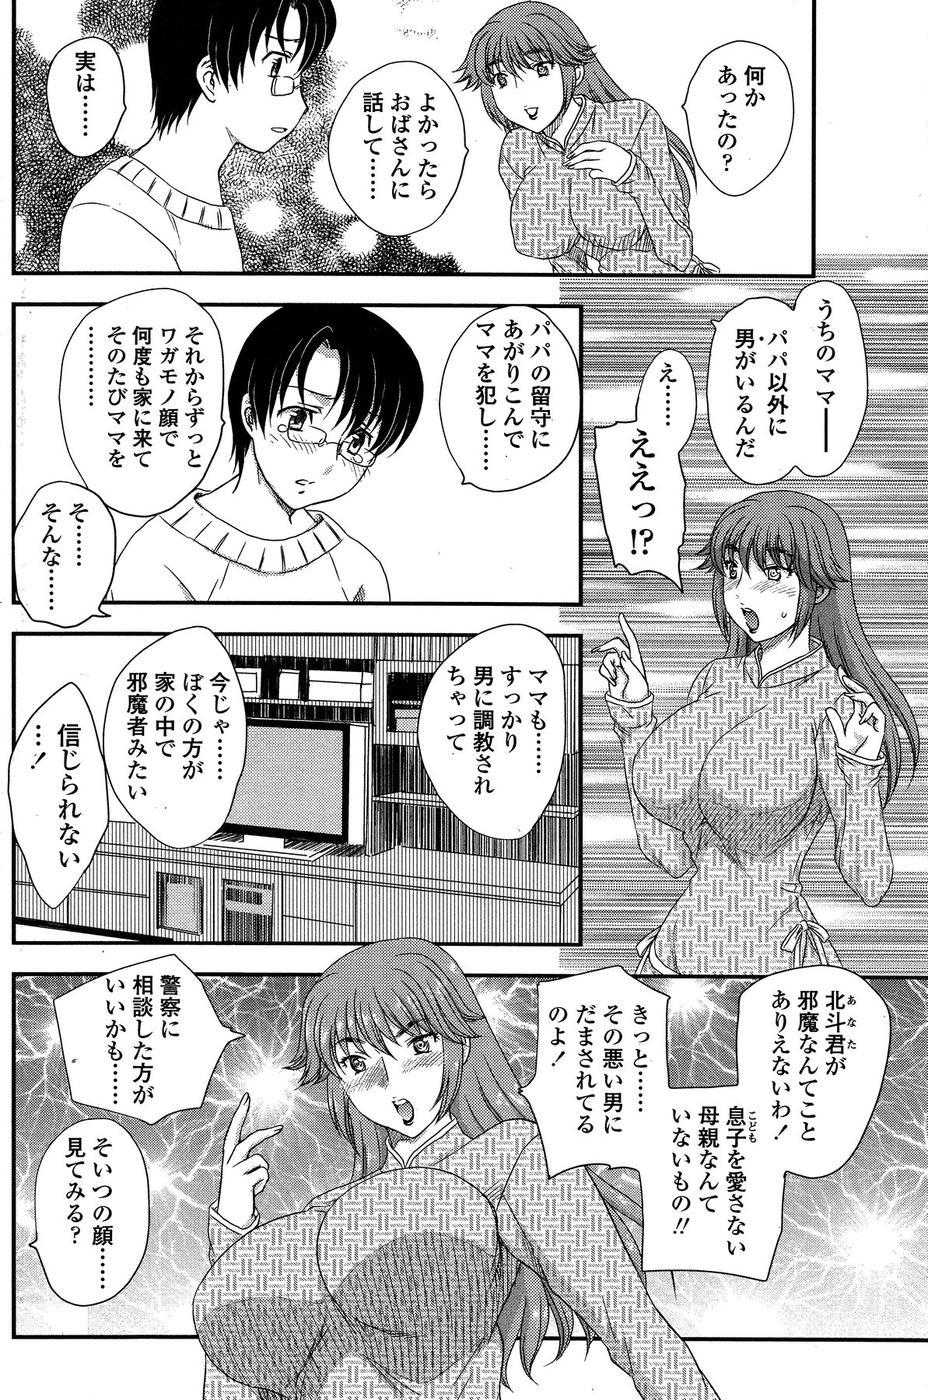 Gay Uniform [Hiryuu Ran] MOTHER'S Ch.02-03, 05-09 Submission - Page 3